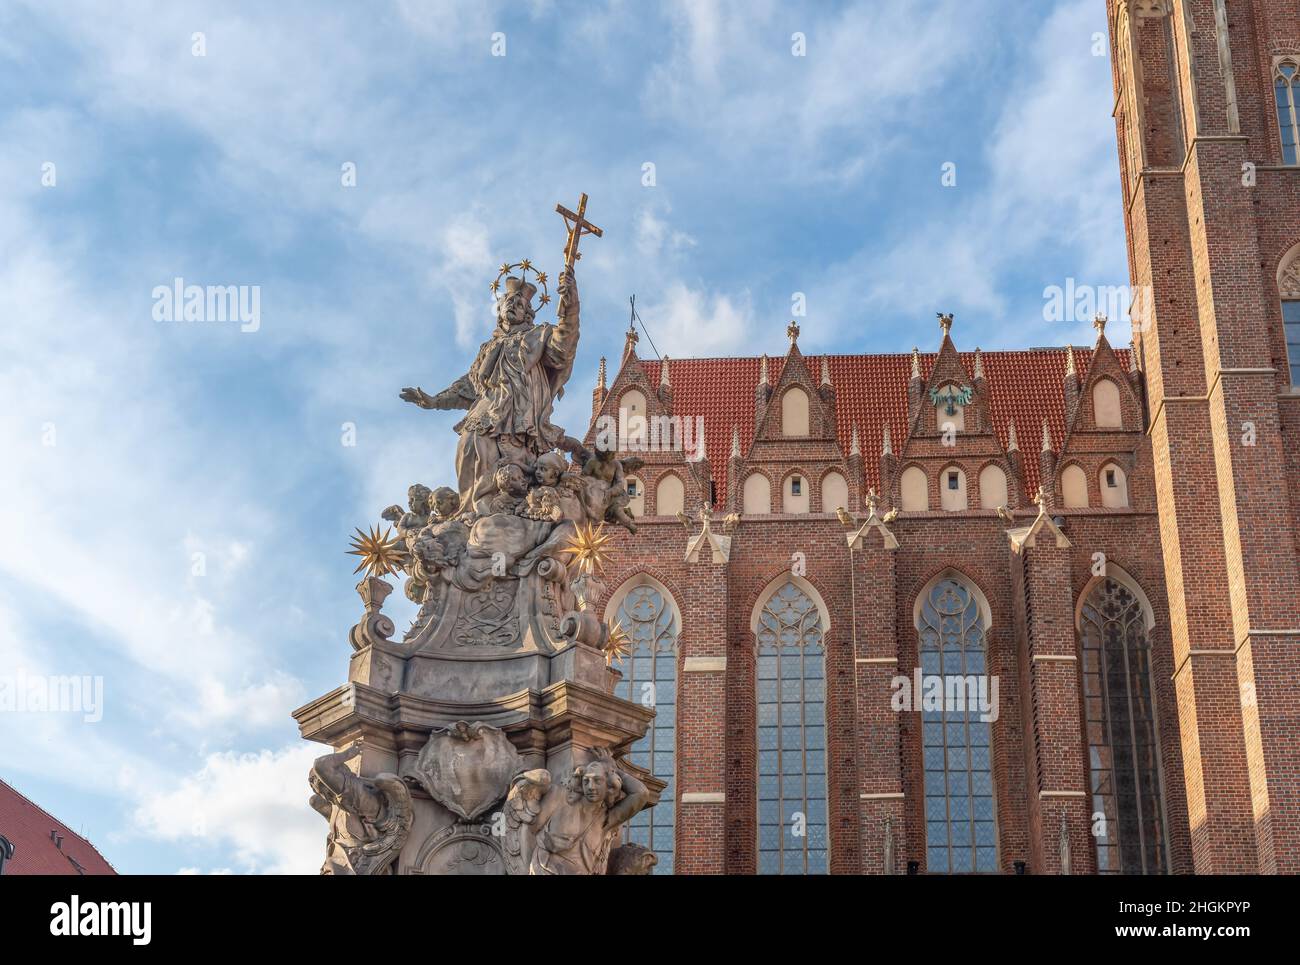 Statue of St. John Nepomuk and Collegiate Church of the Holy Cross at Cathedral Island (Ostrow Tumski) - Wroclaw, Poland Stock Photo